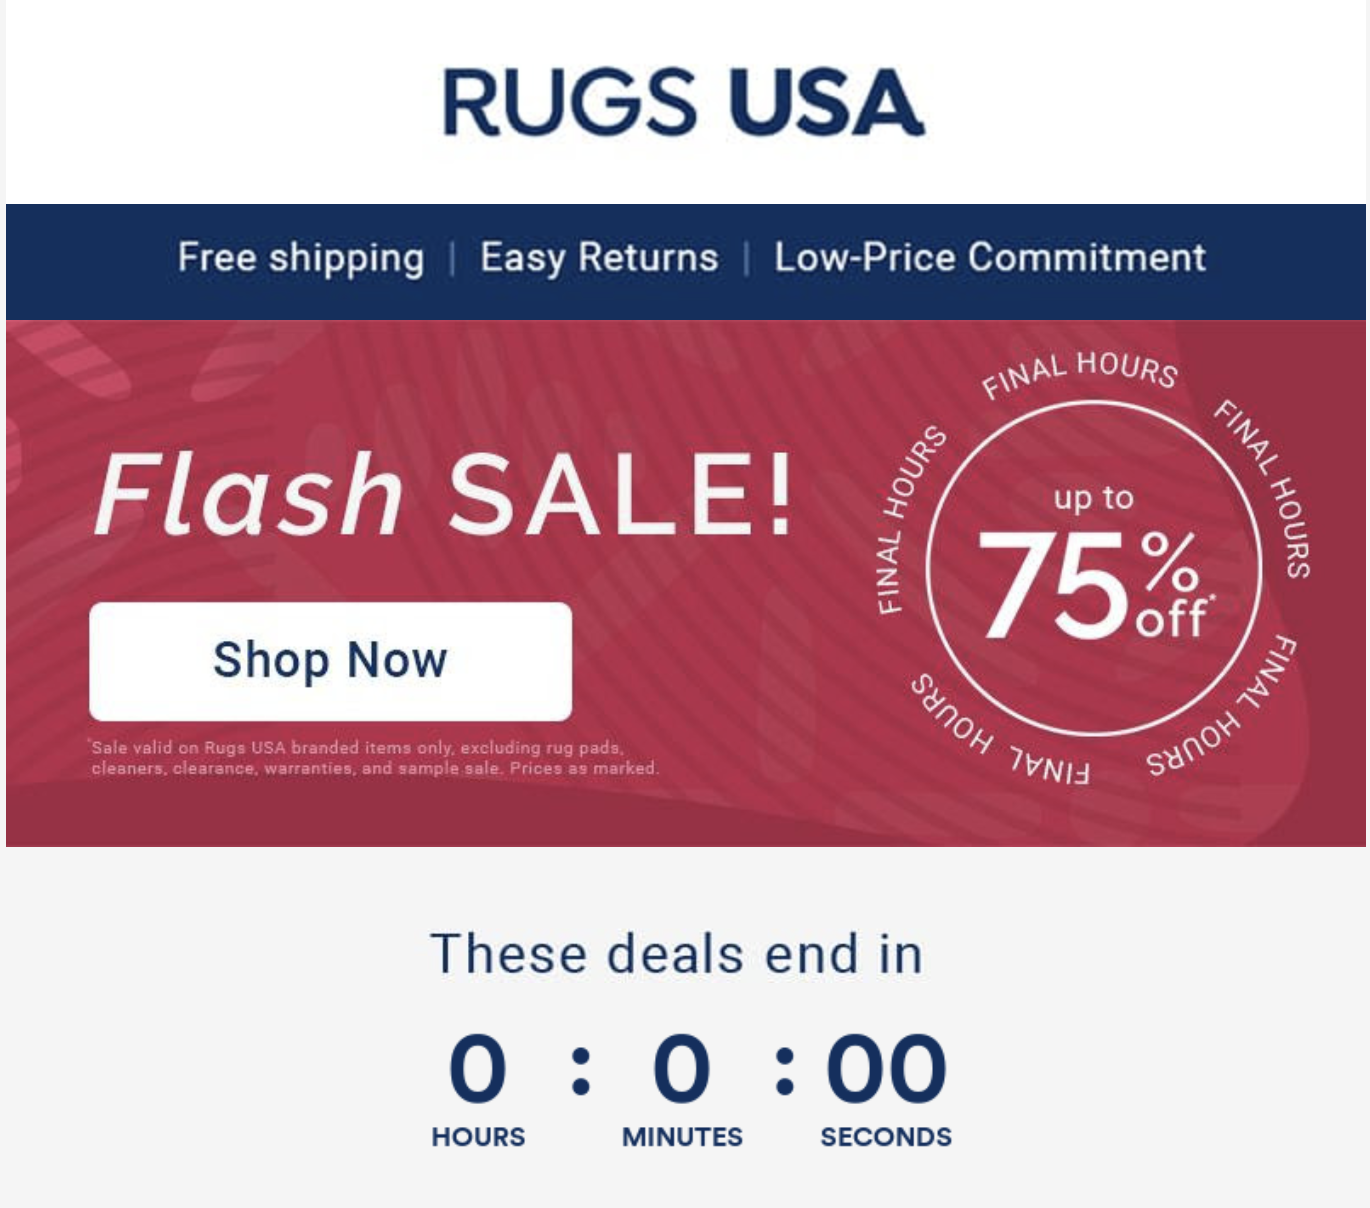 A flash sale email from Rugs USA